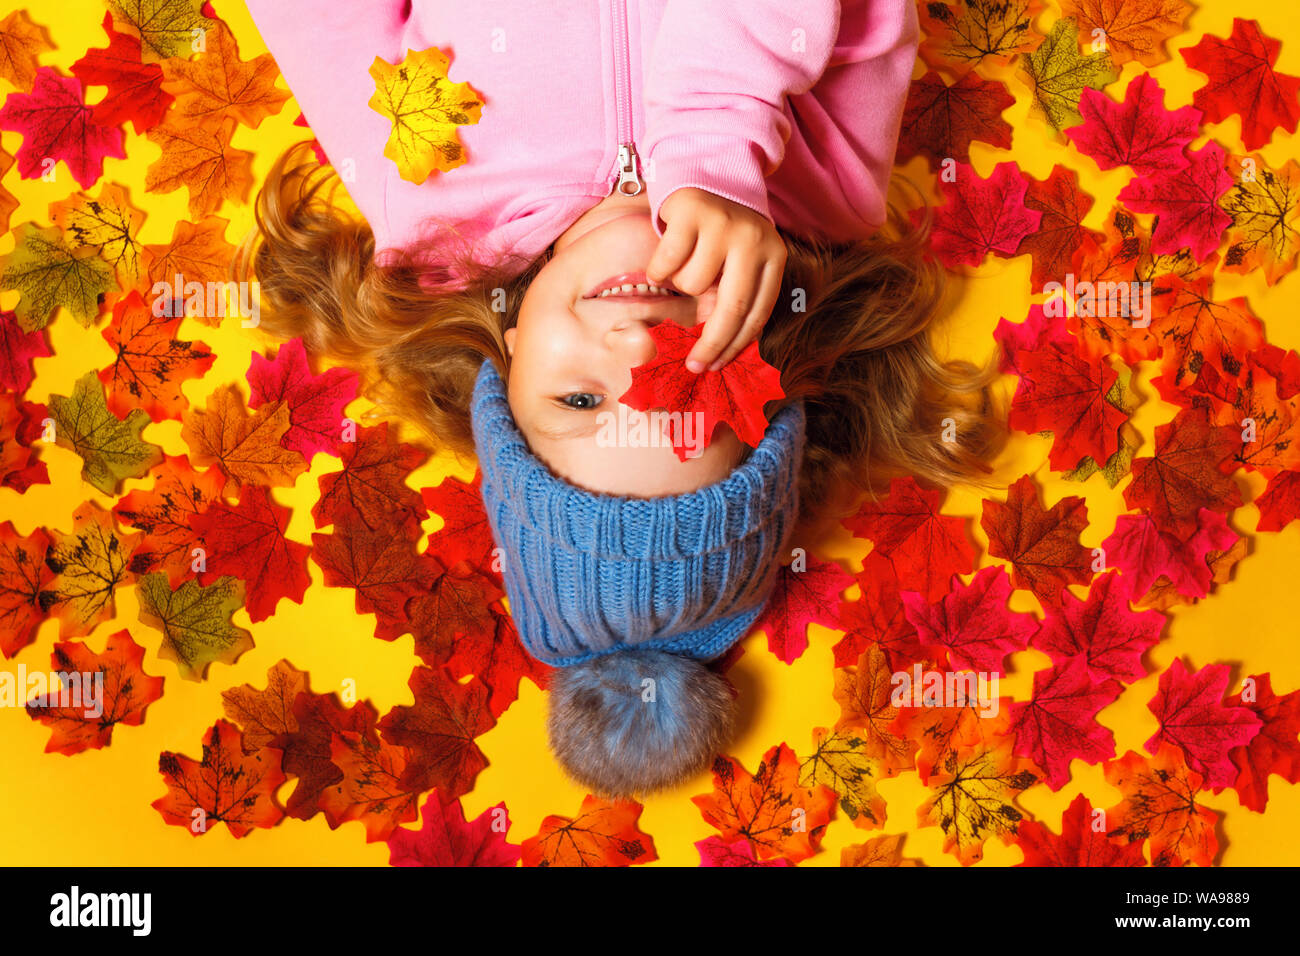 Top view of a happy child lying on the autumn leaves. Stock Photo